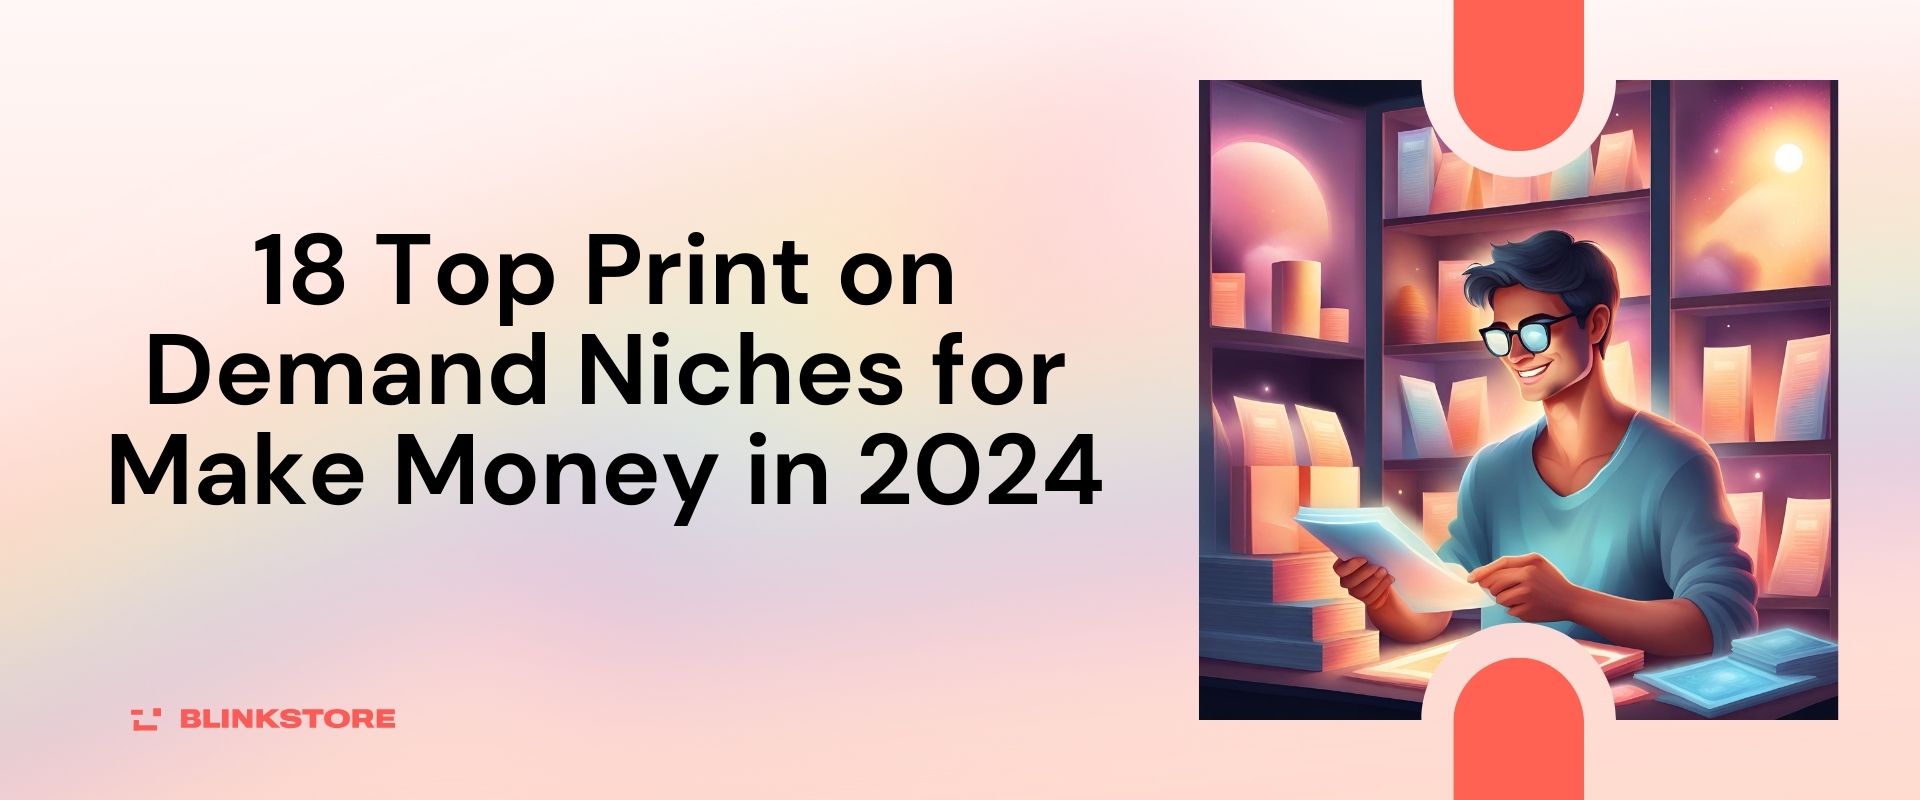 18 Top Print on Demand Niches to Make Money in 2024